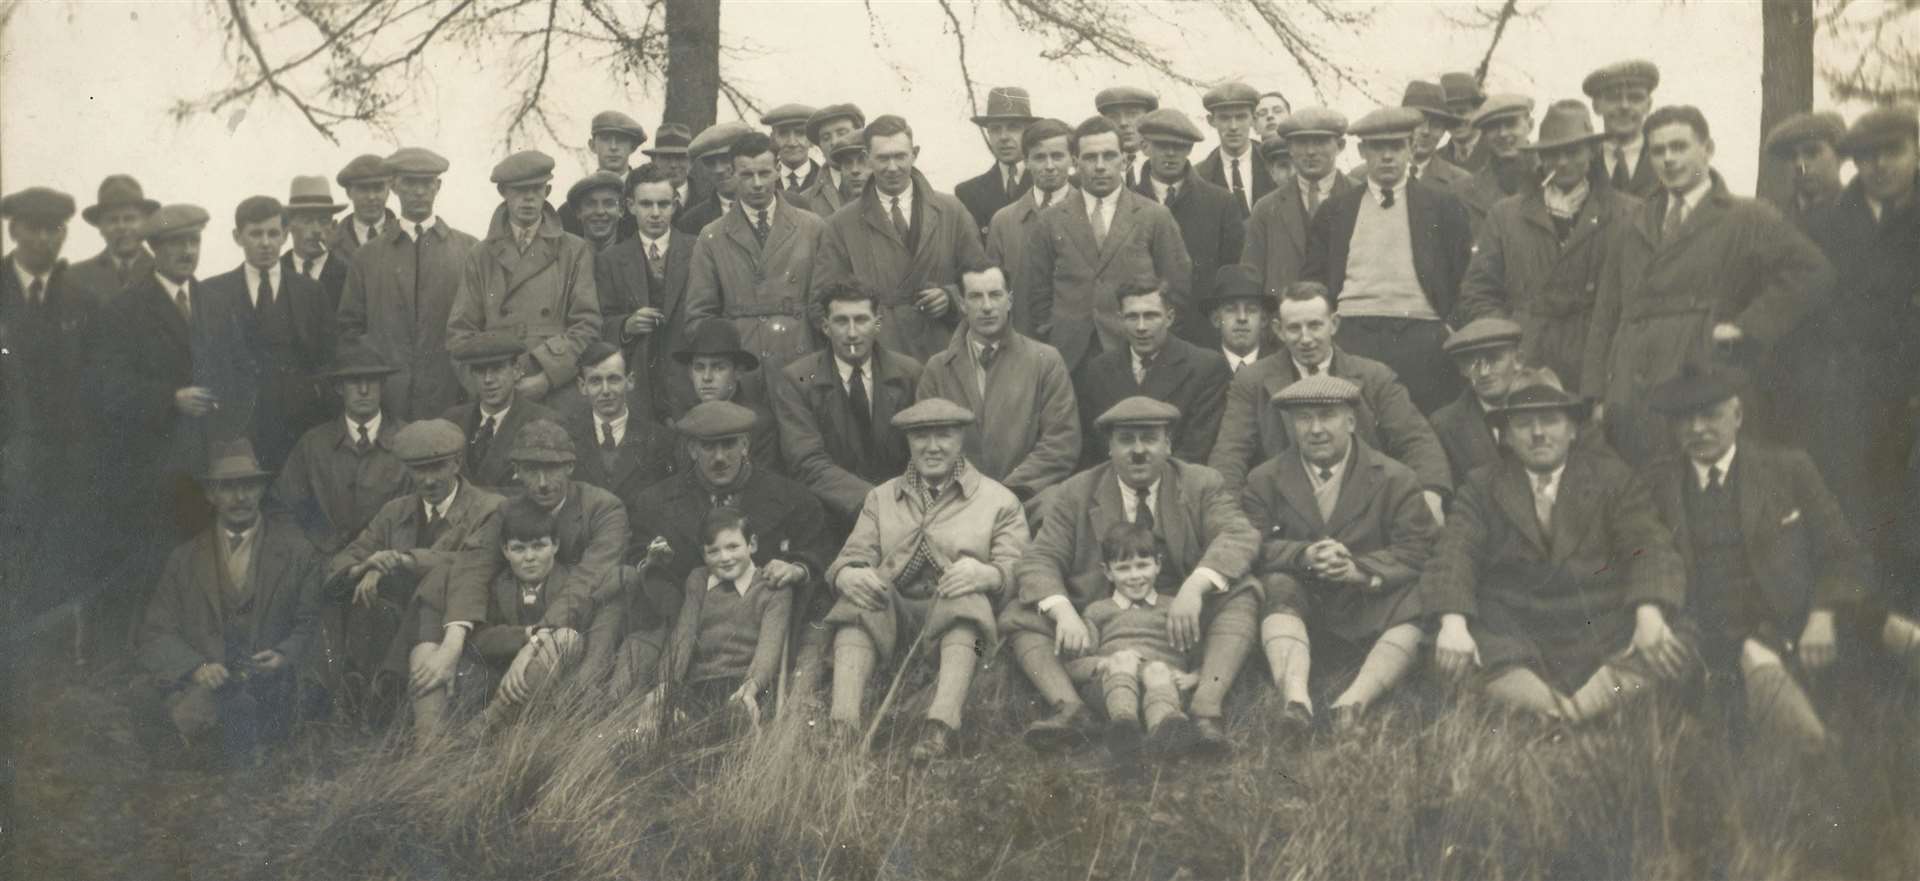 An agricultural ceilidh of three Junior Farmers Associations (Aird, Inverness and Marybank) at Garguston on January 30, 1932 where a demonstration was given on Clydesdale/Shire horses by John MacKenzie, Balnain and Shorthorn cattle by K J MacGillivray, Kirkton..Front row: “Culduthel”, J MacKenzie, Balnain, Capt J Cameron, Balnakyle, K J MacGillivray, Kirkton, J Cumming, Allanfearn, R S MacWilliam, Garguston, J Black, North of Scotland College of Agriculture (Inverness Area), W A Longmore, North of Scotland College of Agriculture (Ross-shire Area), A W Hill, late of Lemlair, with the students in the background..